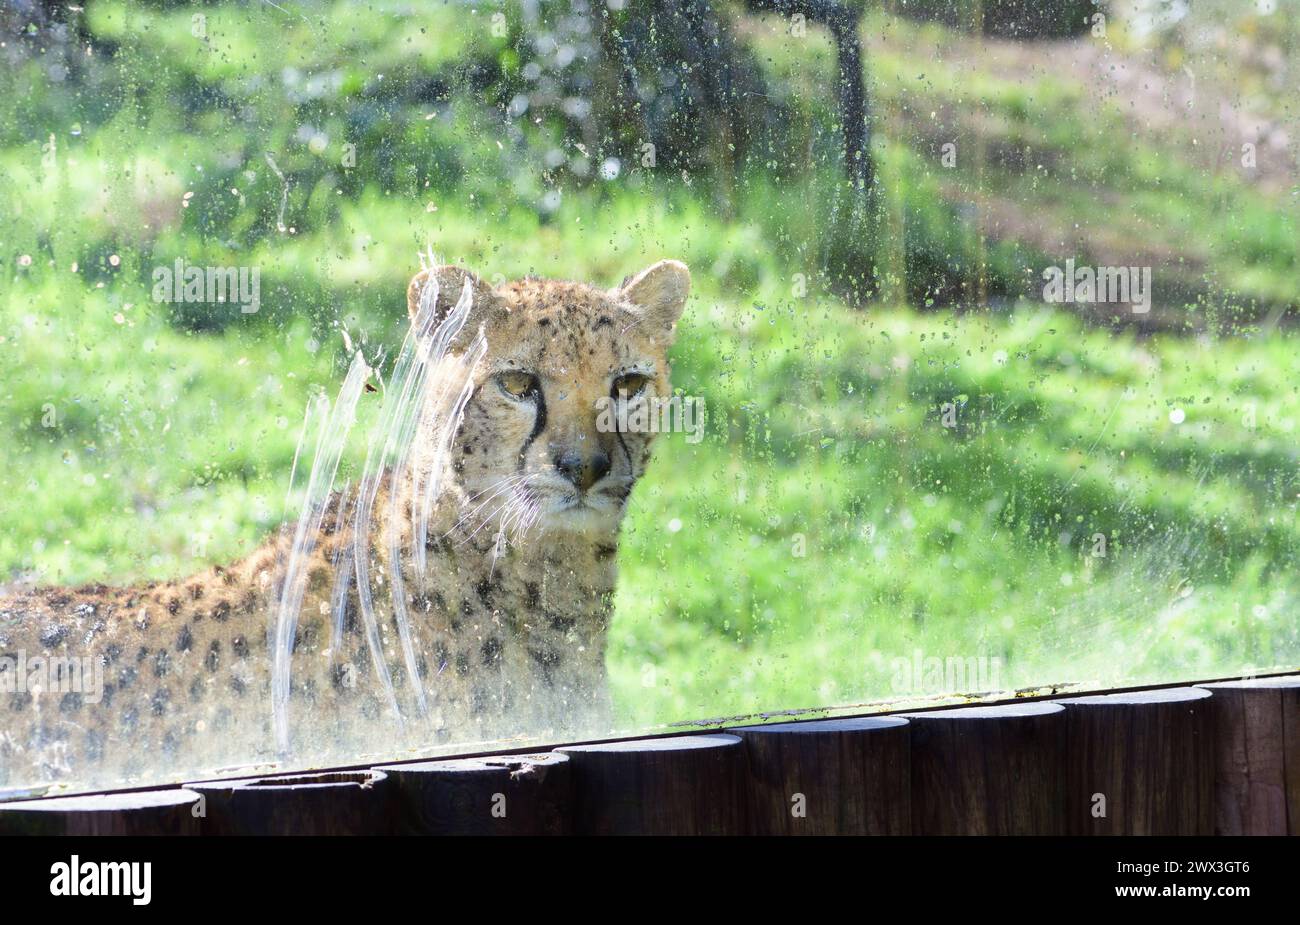 A cheetah looking through a dirty window in its enclosure at Paignton Zoo. Stock Photo